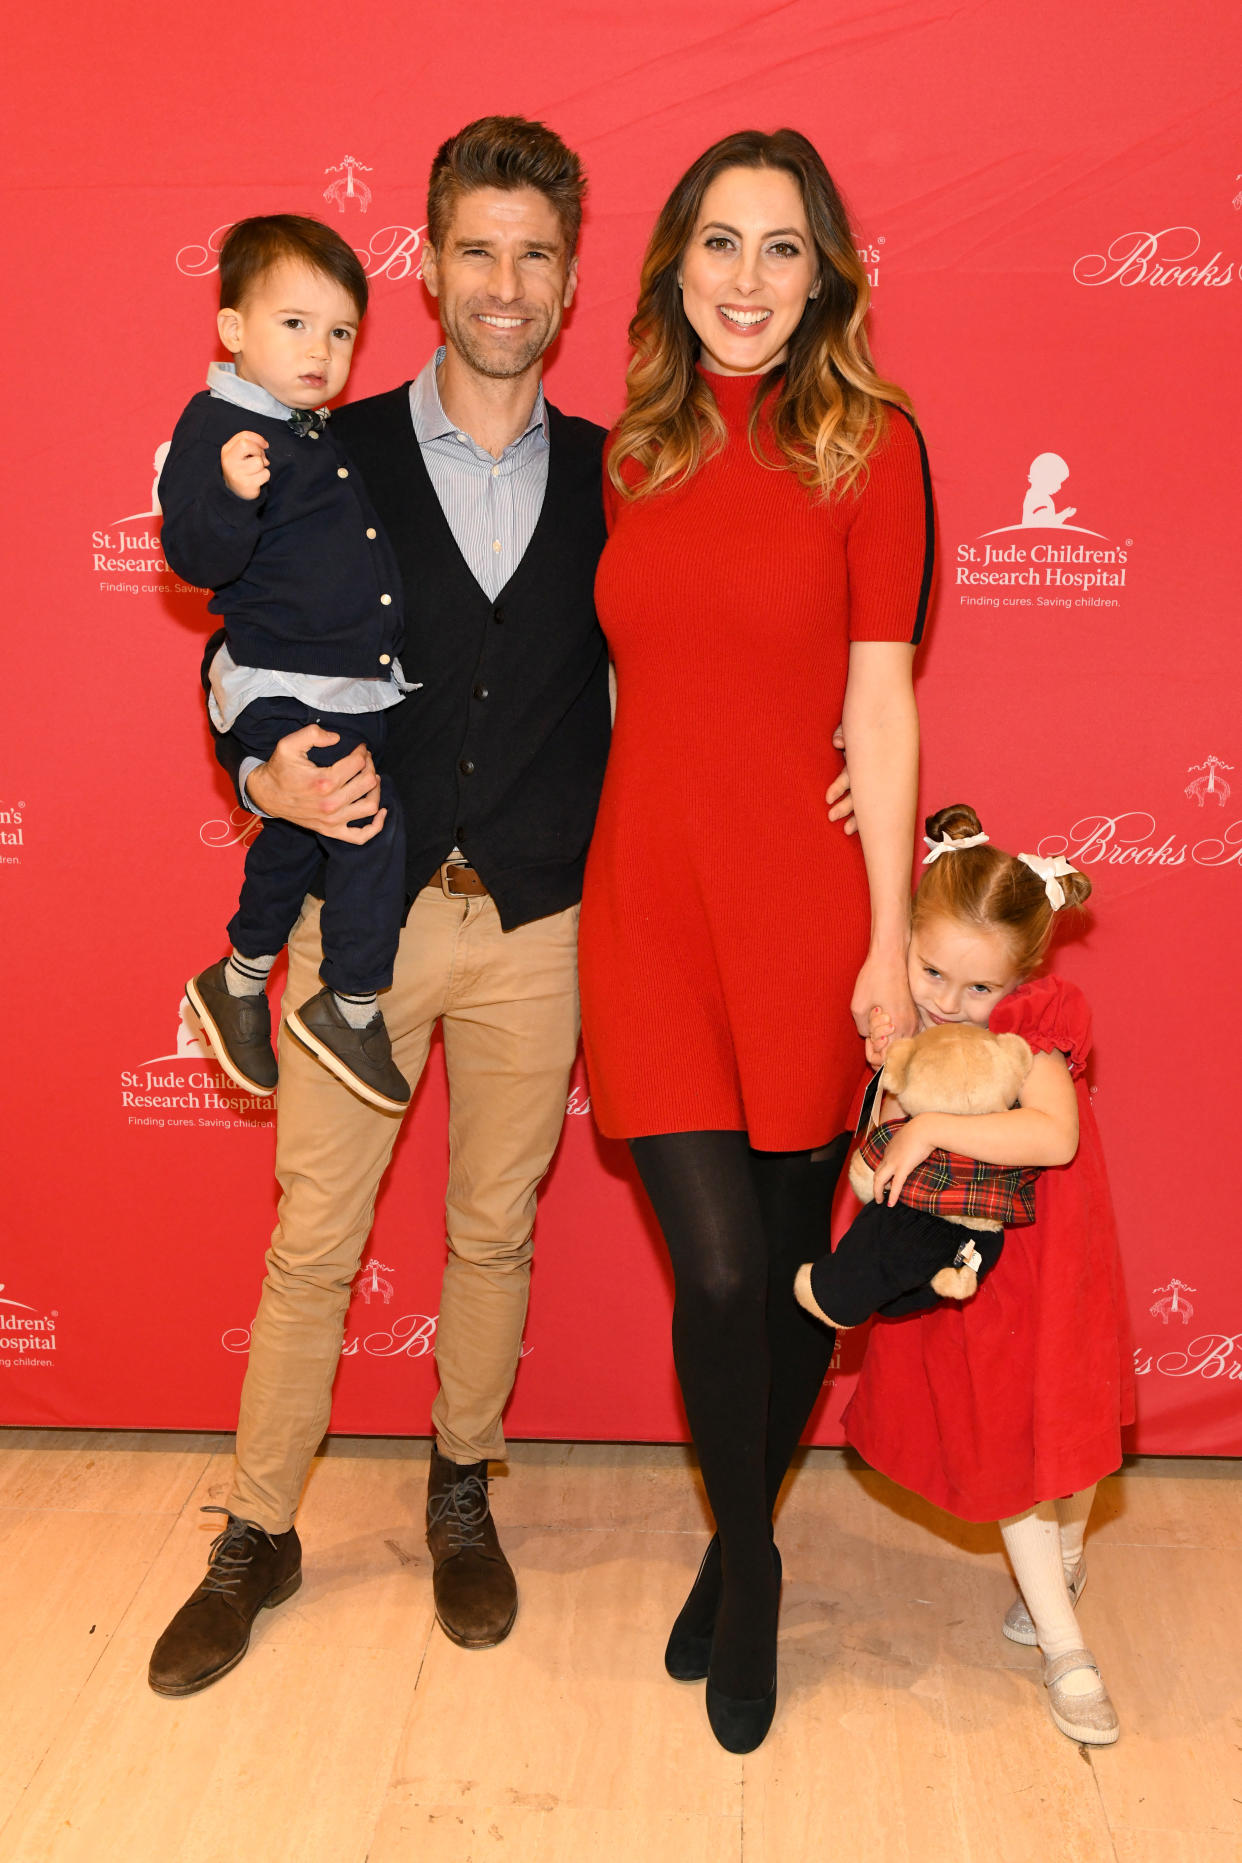 Eva Amurri Martino and Kyle Martino announced their split on November 15, but the former couple, who are expecting a baby next year, are committed coparents. (Photo: Craig Barritt/Getty Images for Brooks Brothers)